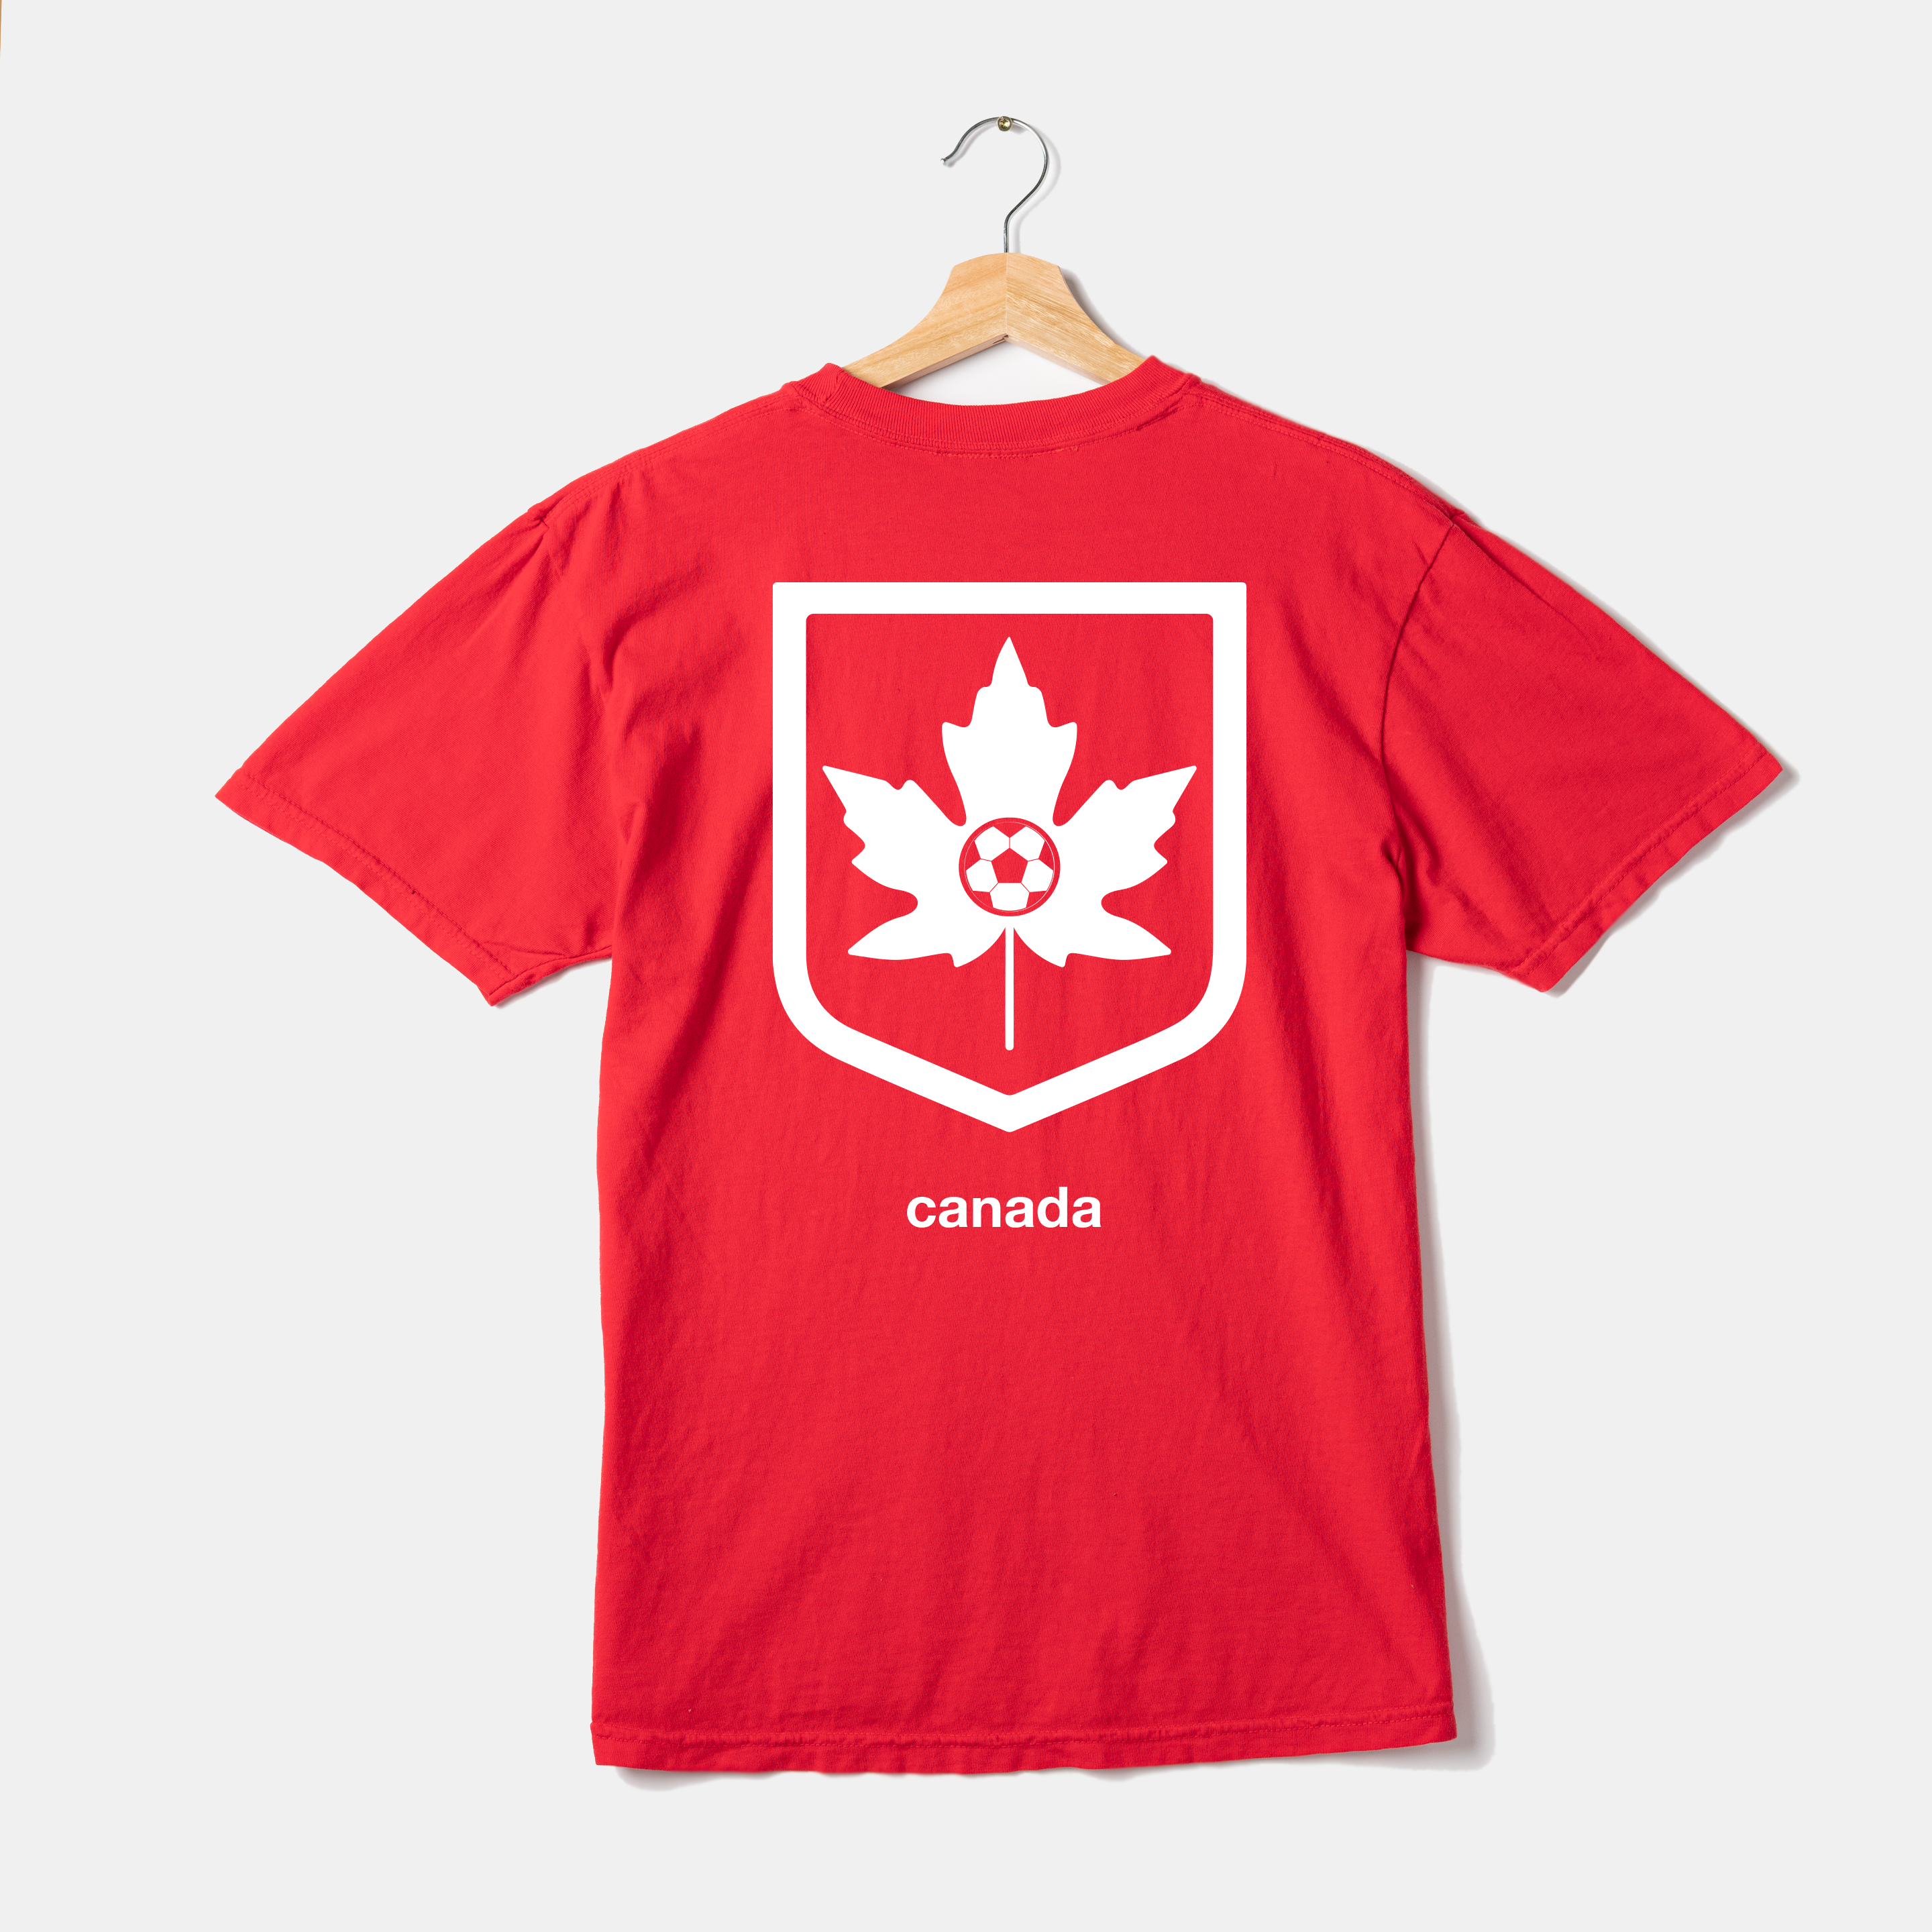 "Unofficial" Canada Tee